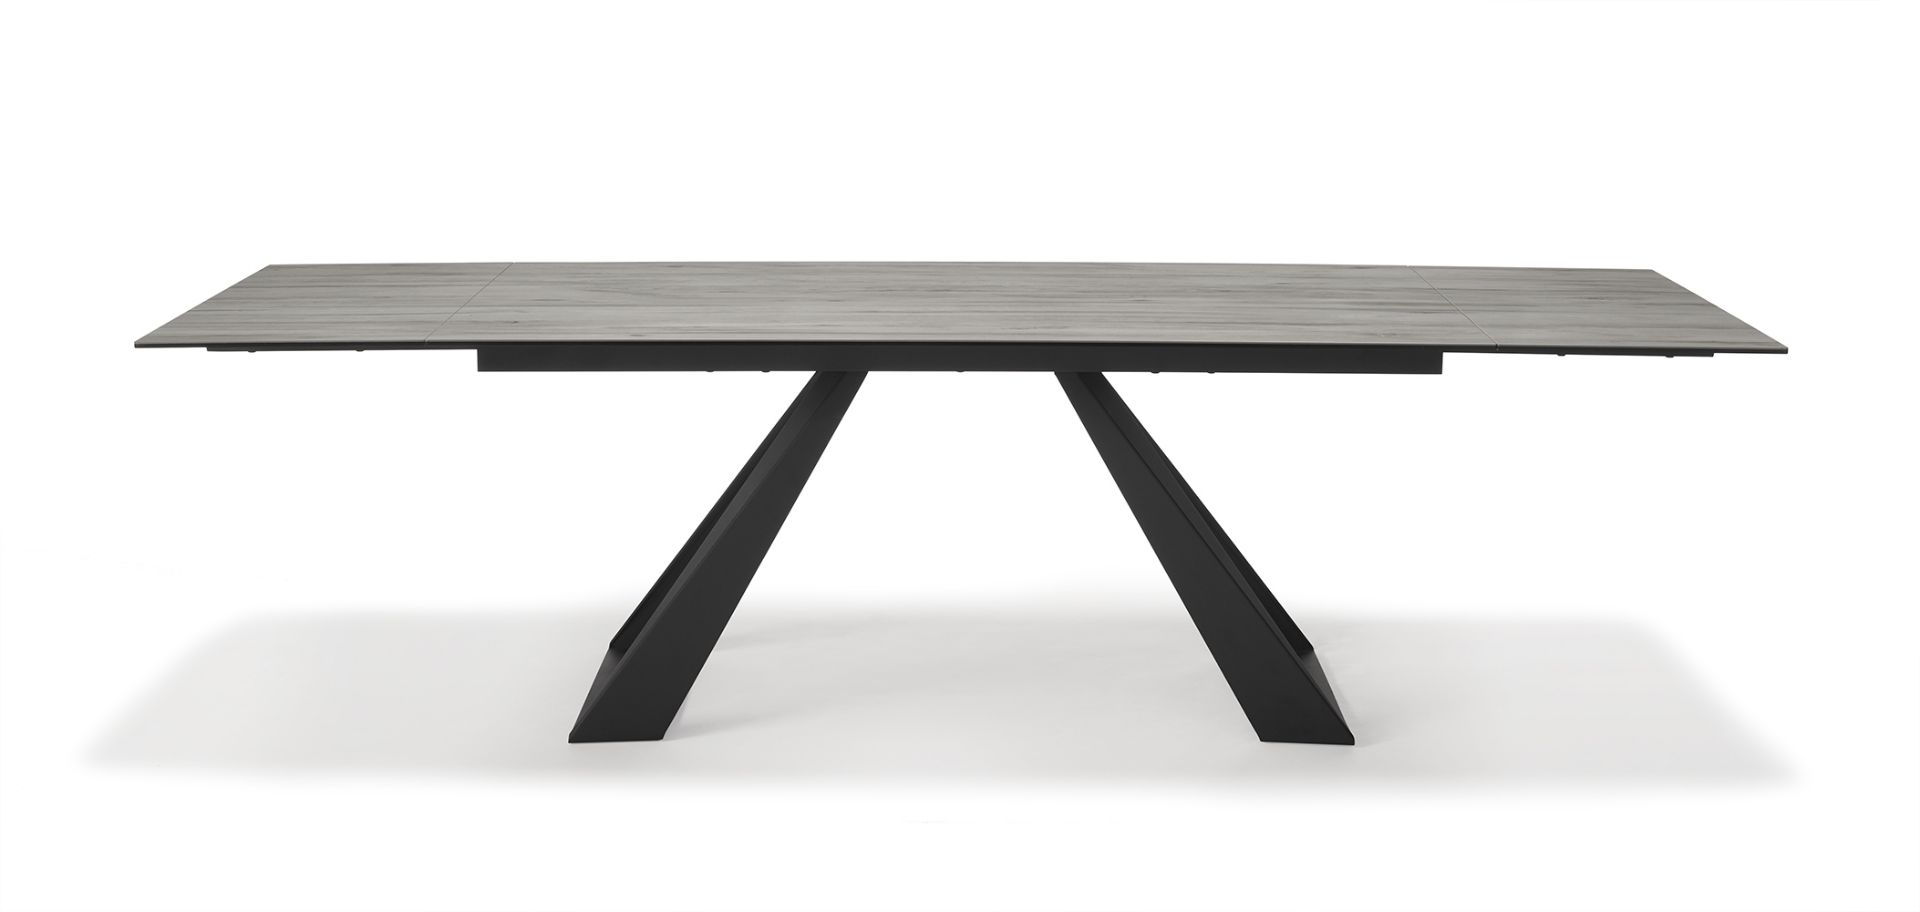 Spartan Dining Table by Kesterport The Spartan Dining Table is part of a sophisticated collection of - Bild 2 aus 4